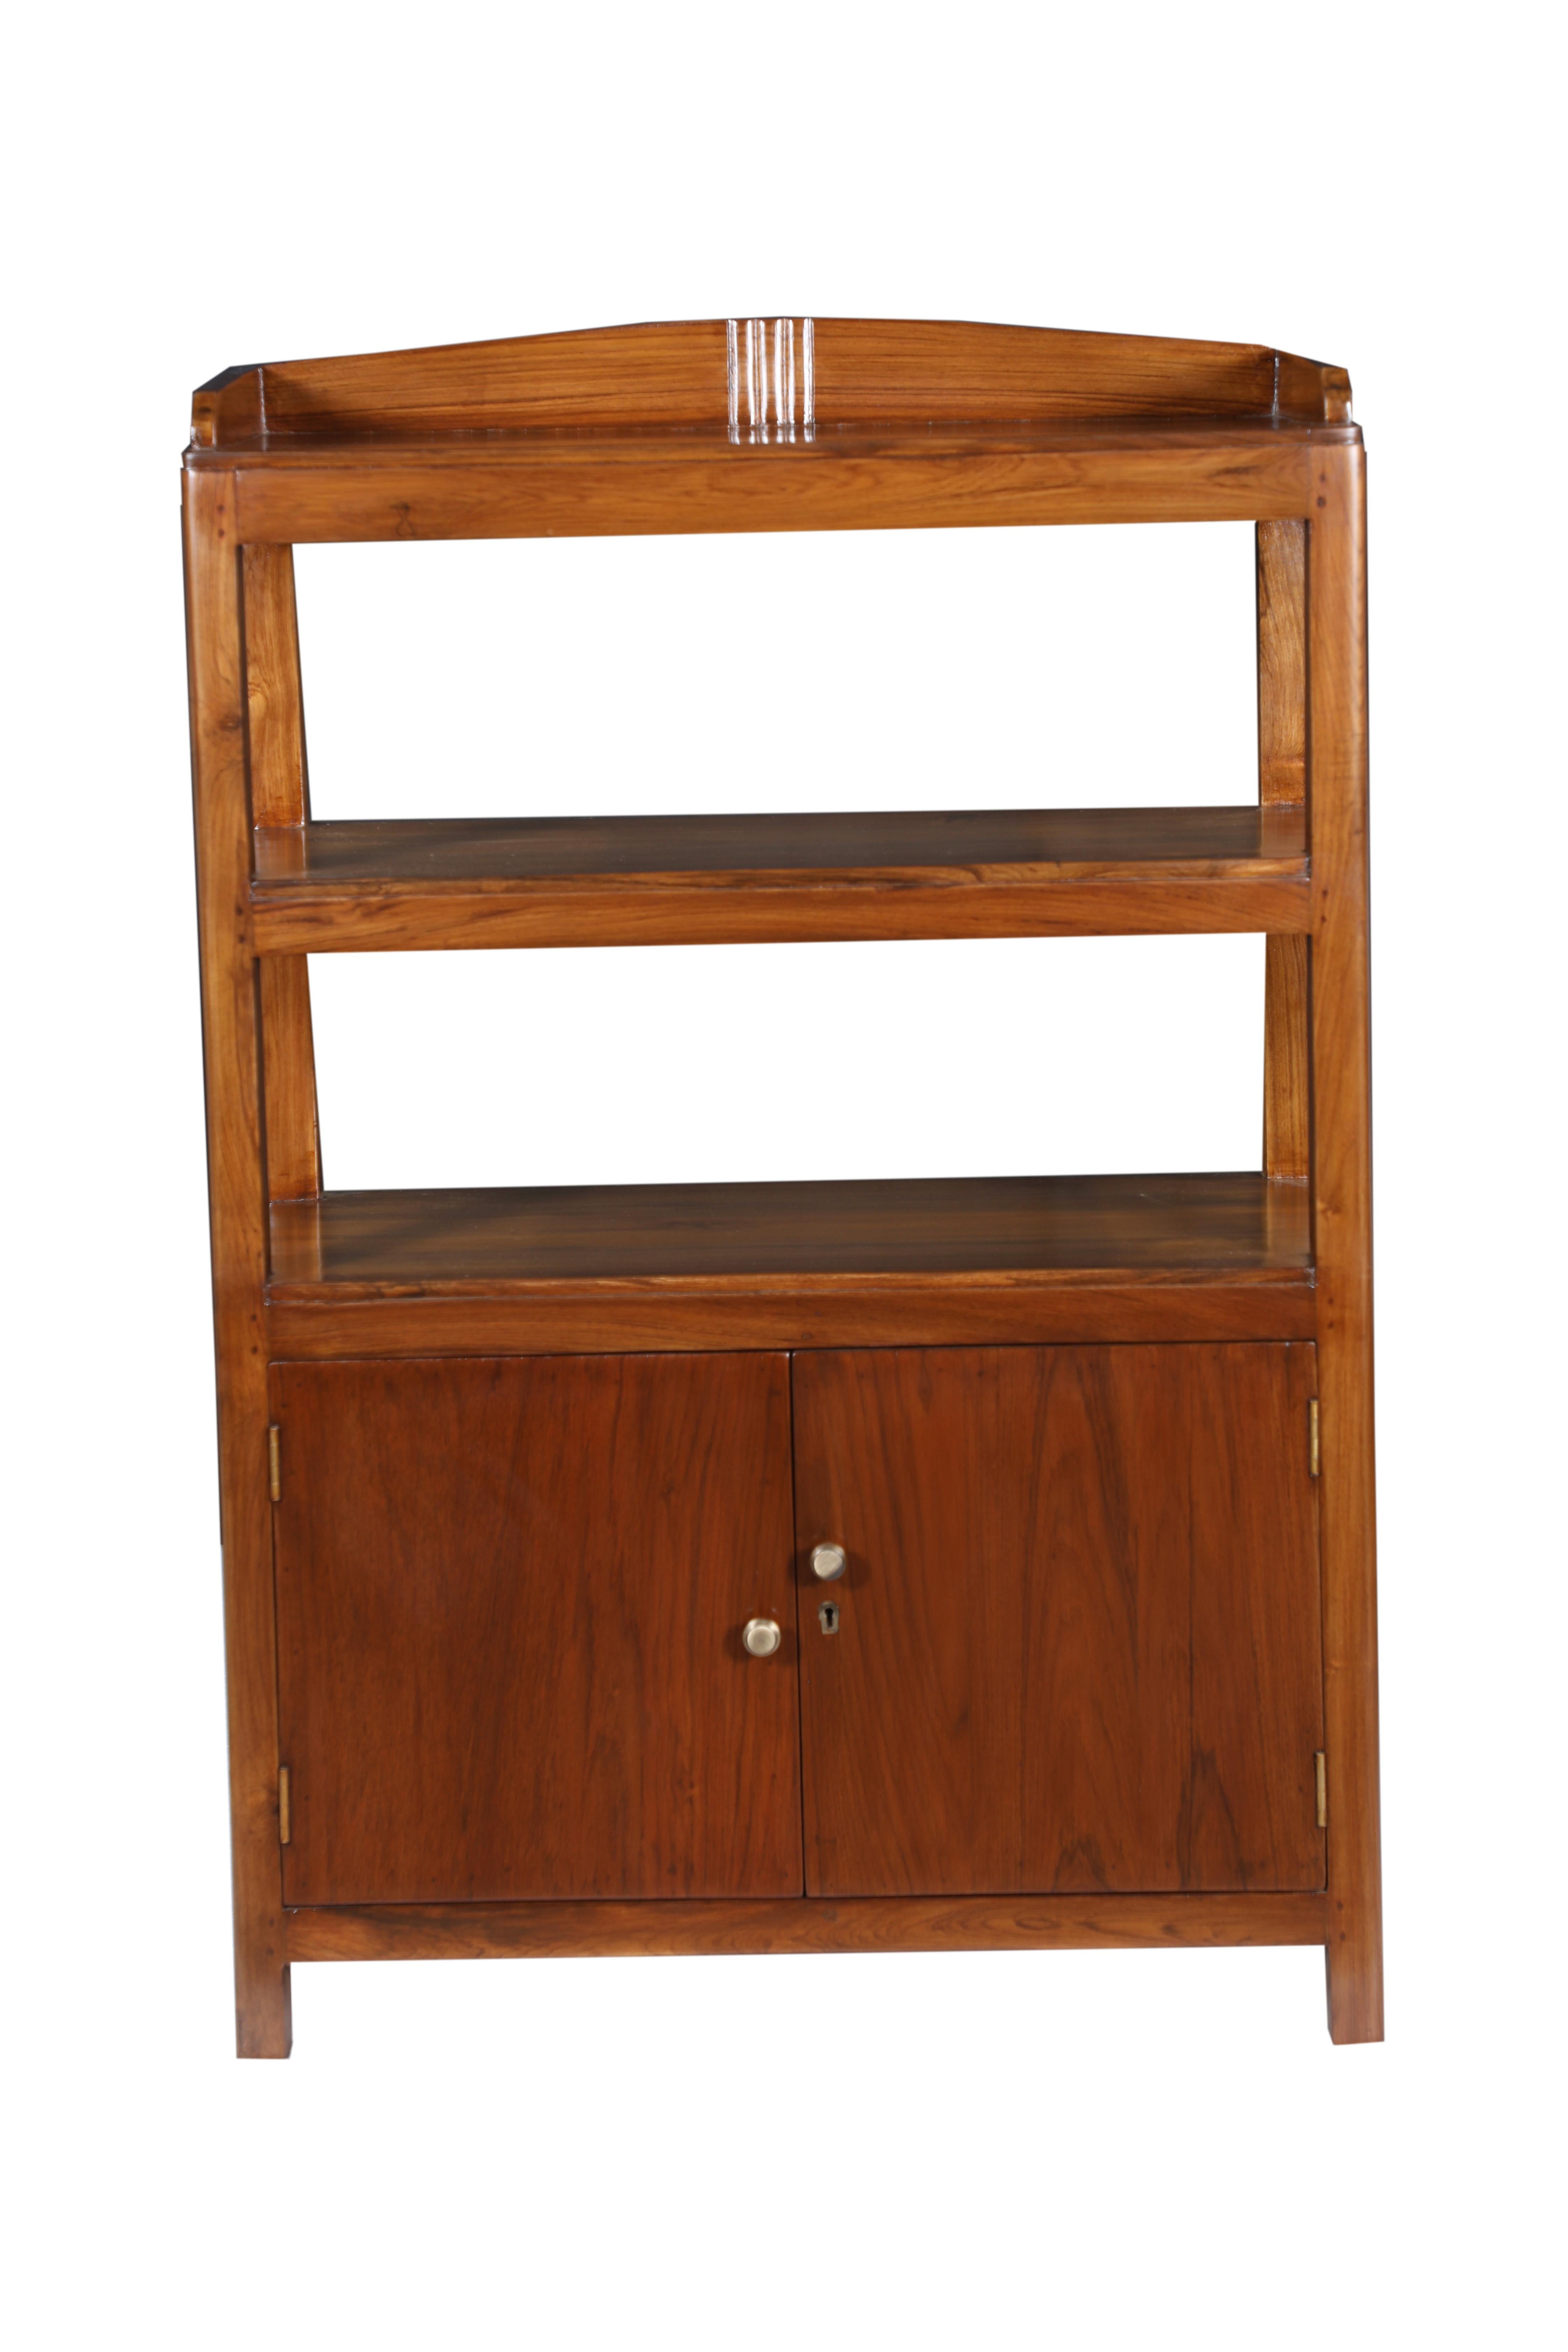 A Mid-Century Modern combination teak bookcase shelves and cabinet at the lower third. Offset brass knobs on the front doors of the cabinet portion. Carved detail at the top crest. Circa 1970's.